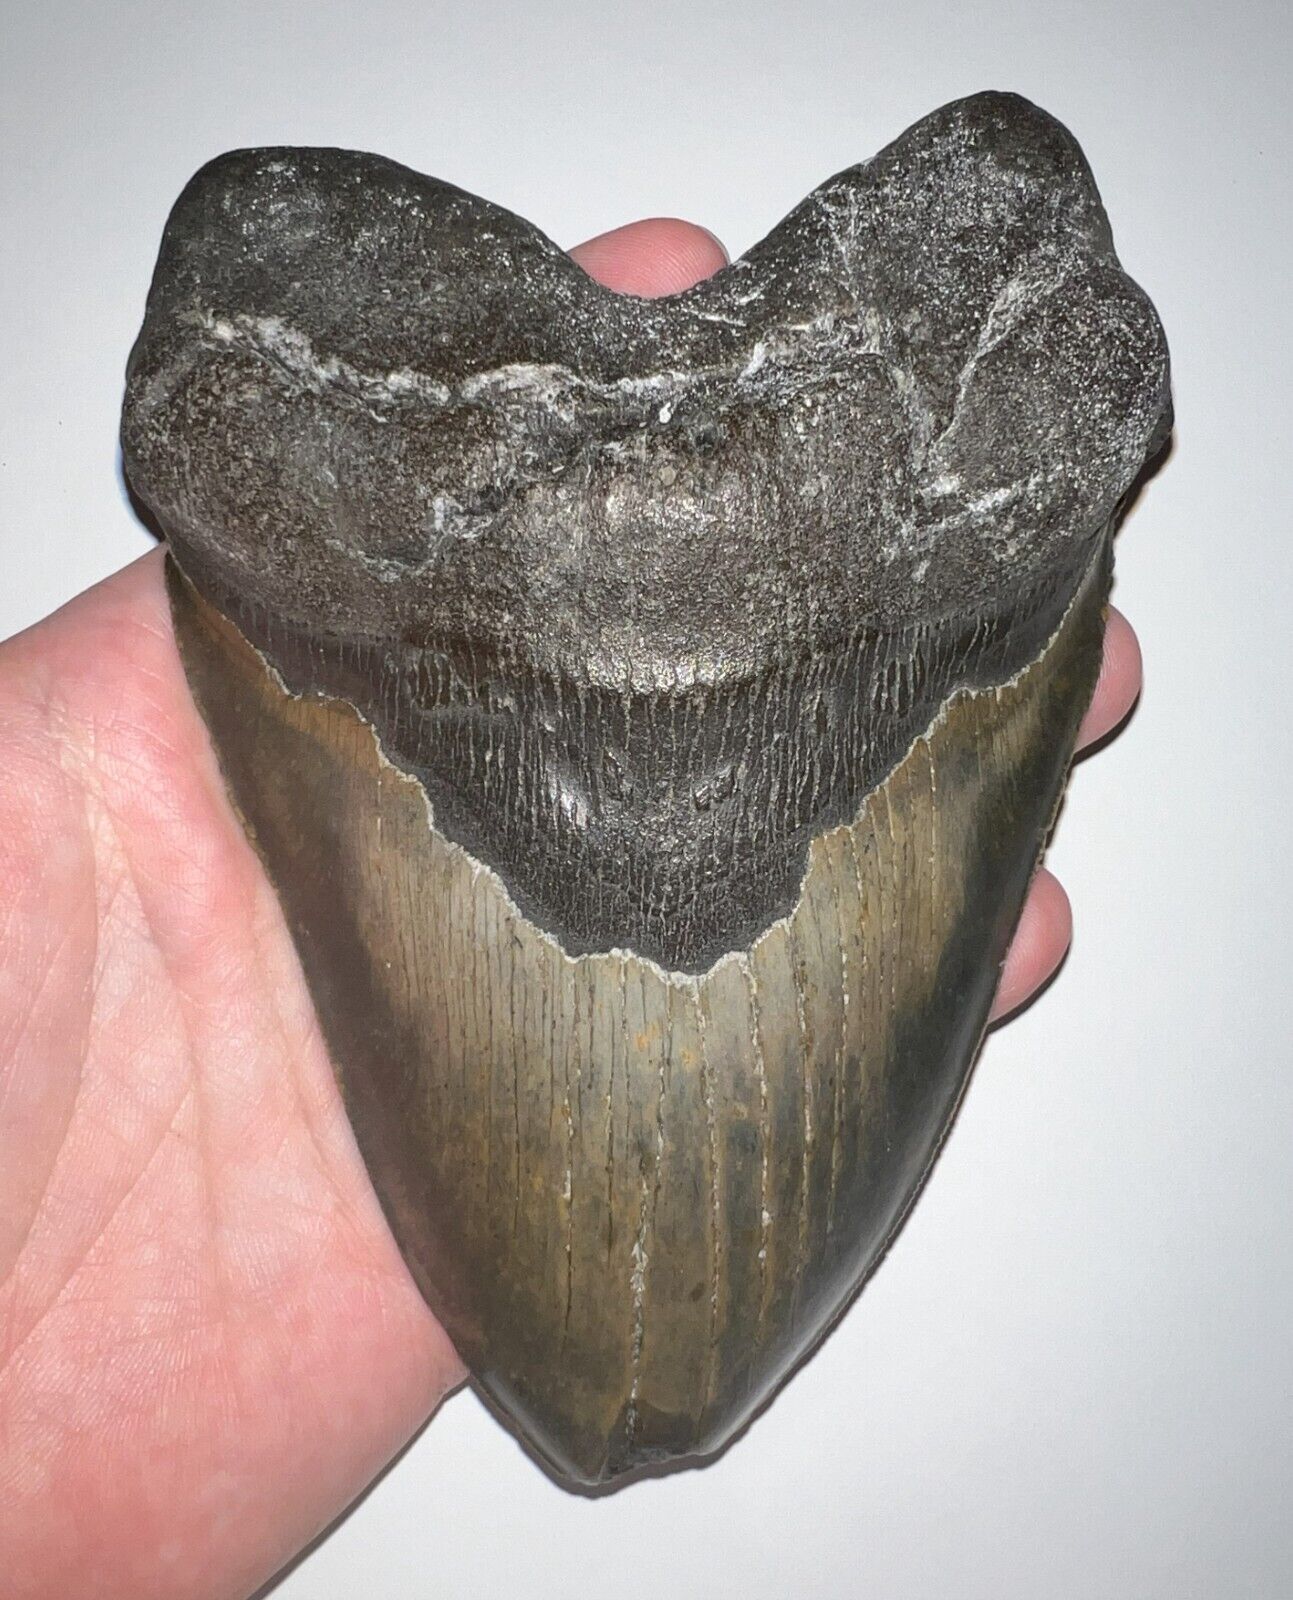 MONSTER MEGALODON Fossil Shark Tooth 6.12 INCHES NO REPAIR FANTASTIC SERRATION